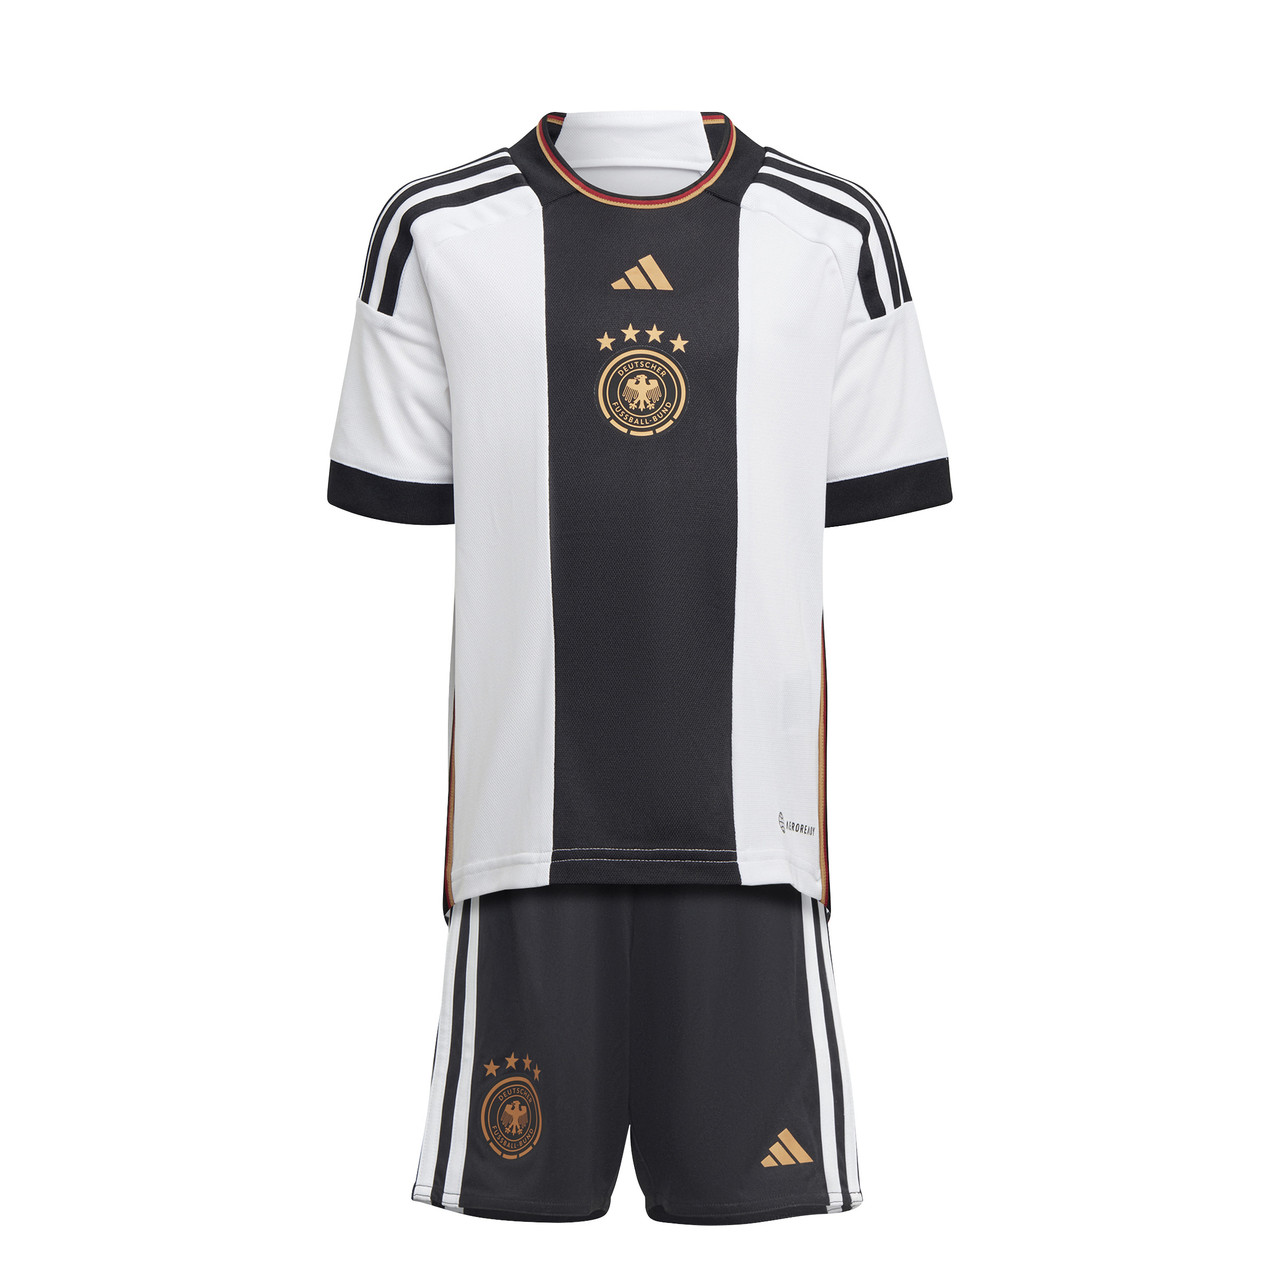 adidas adidas Youth Germany WC 2022 World Cup Home Jersey - White/Black/Gold